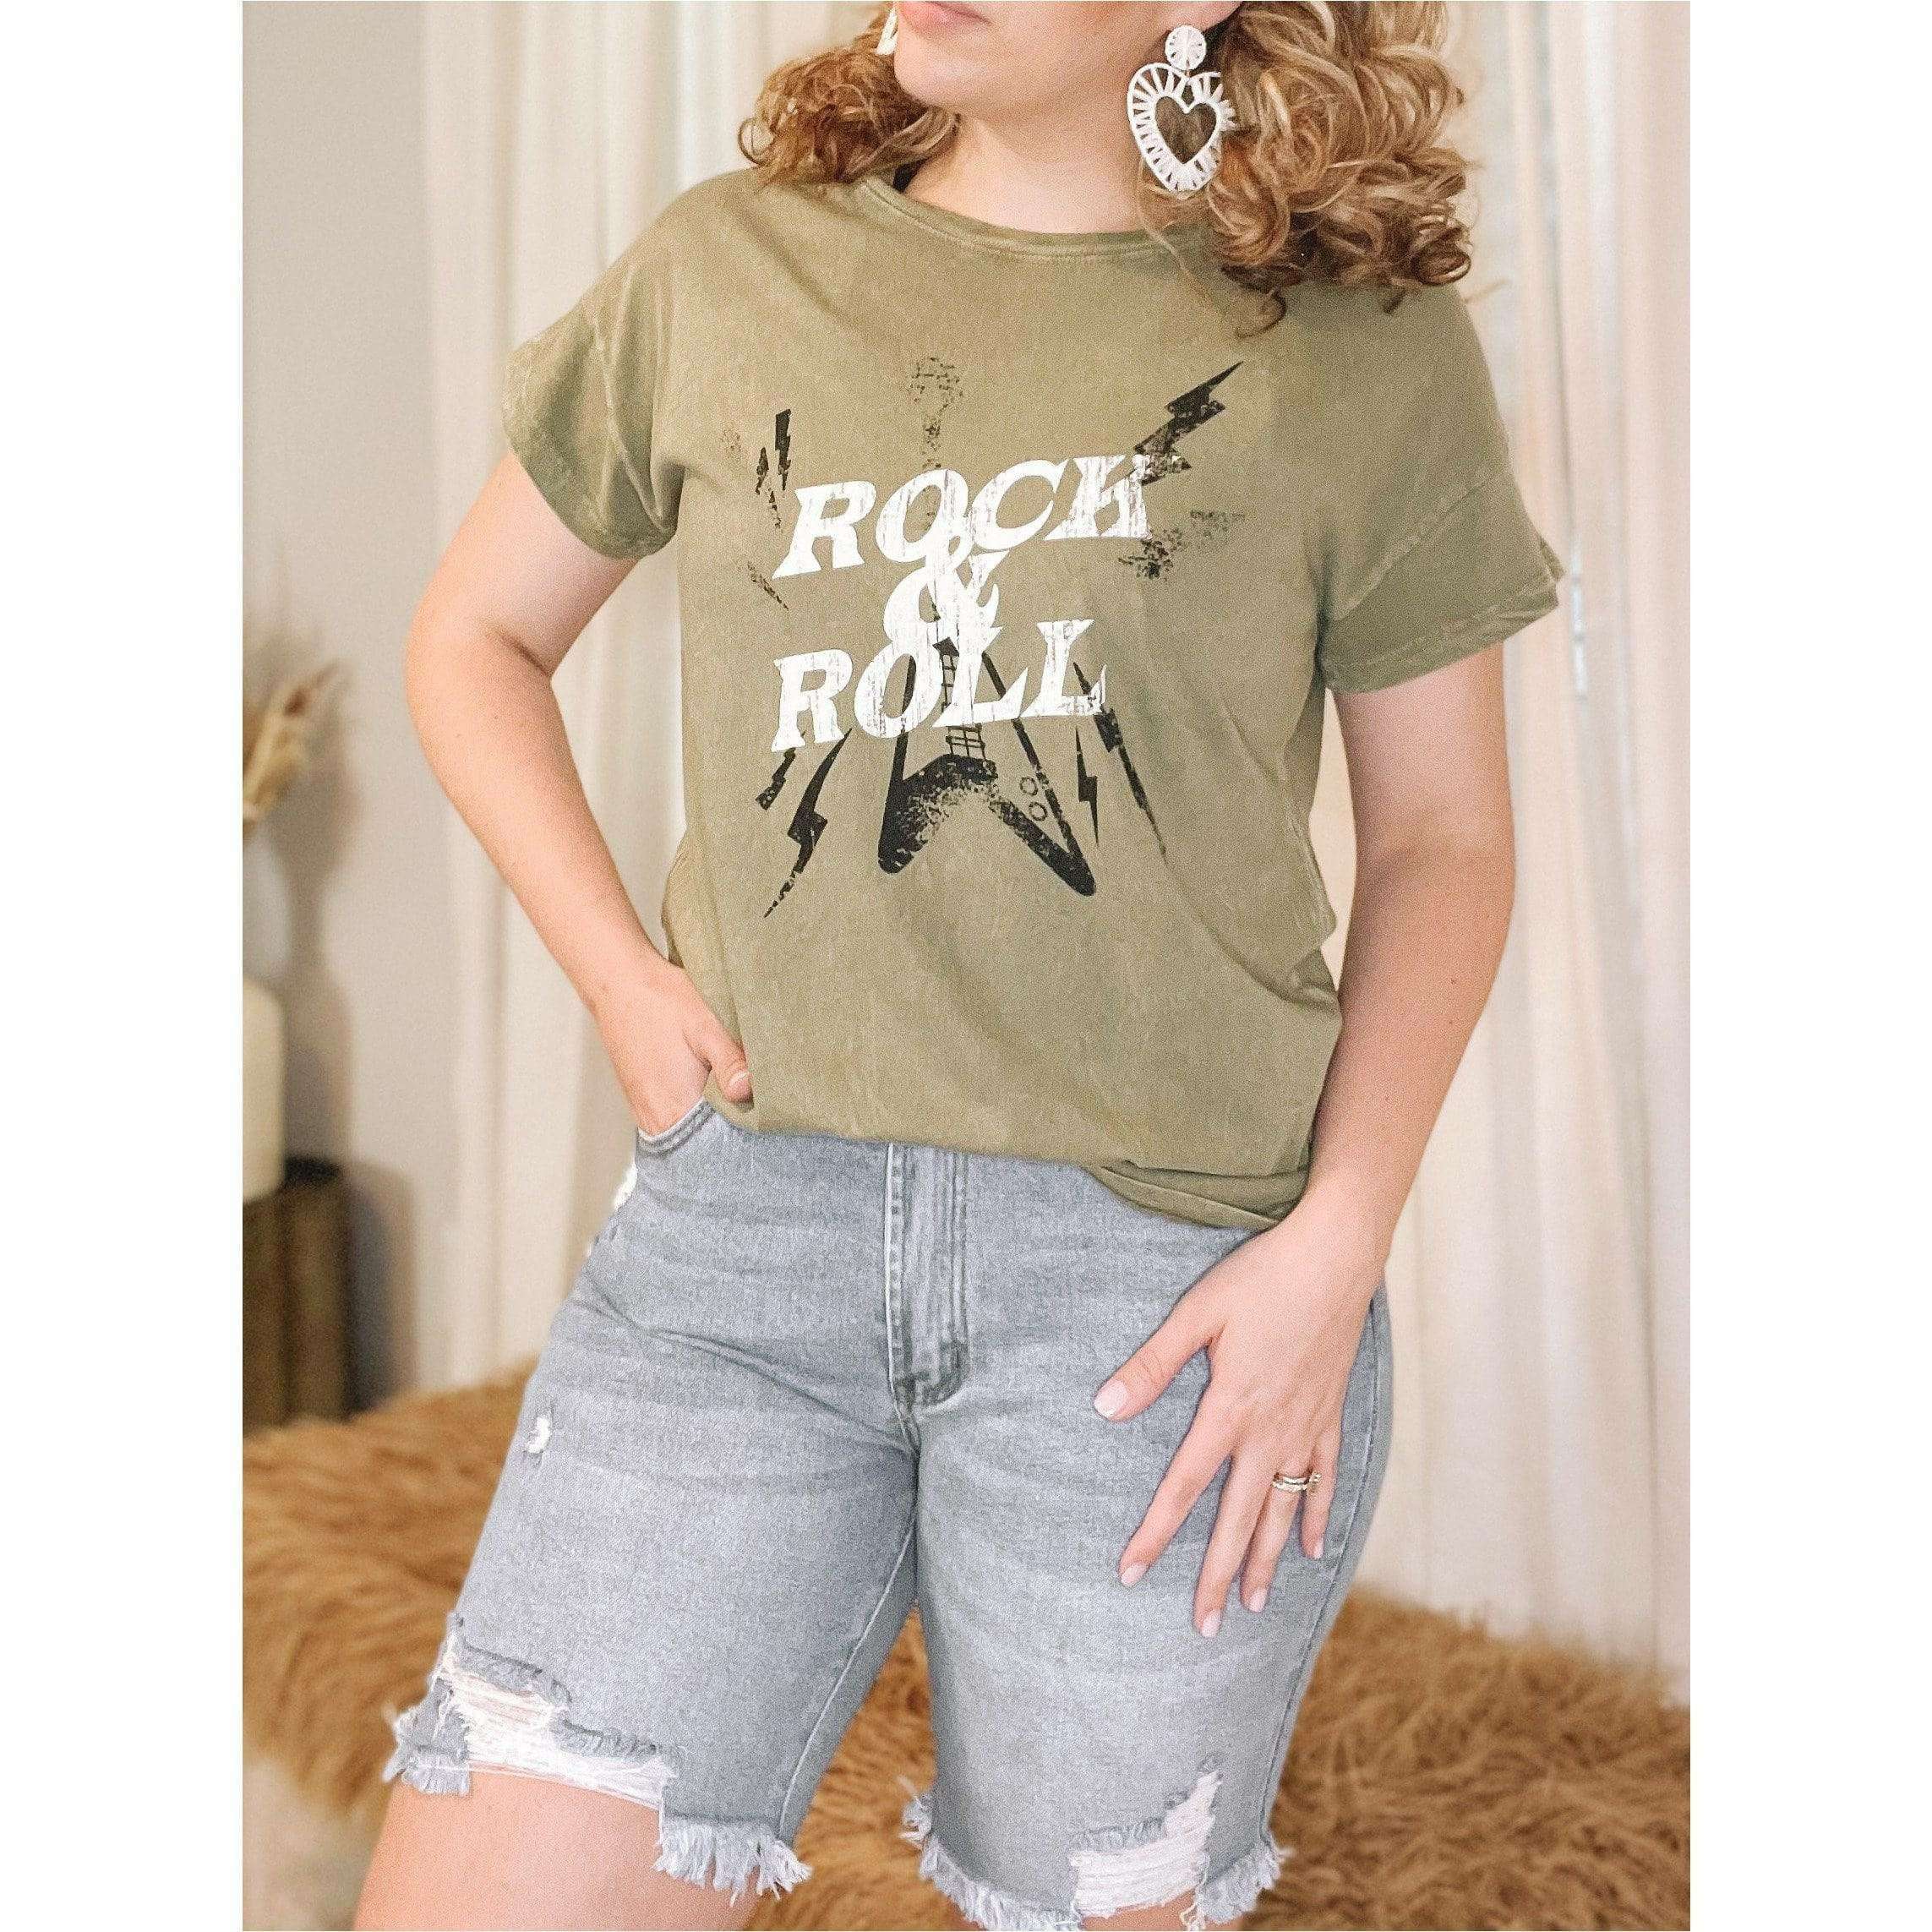 Rock & Roll Vintage Tee - The Hive by Chris Jesselle